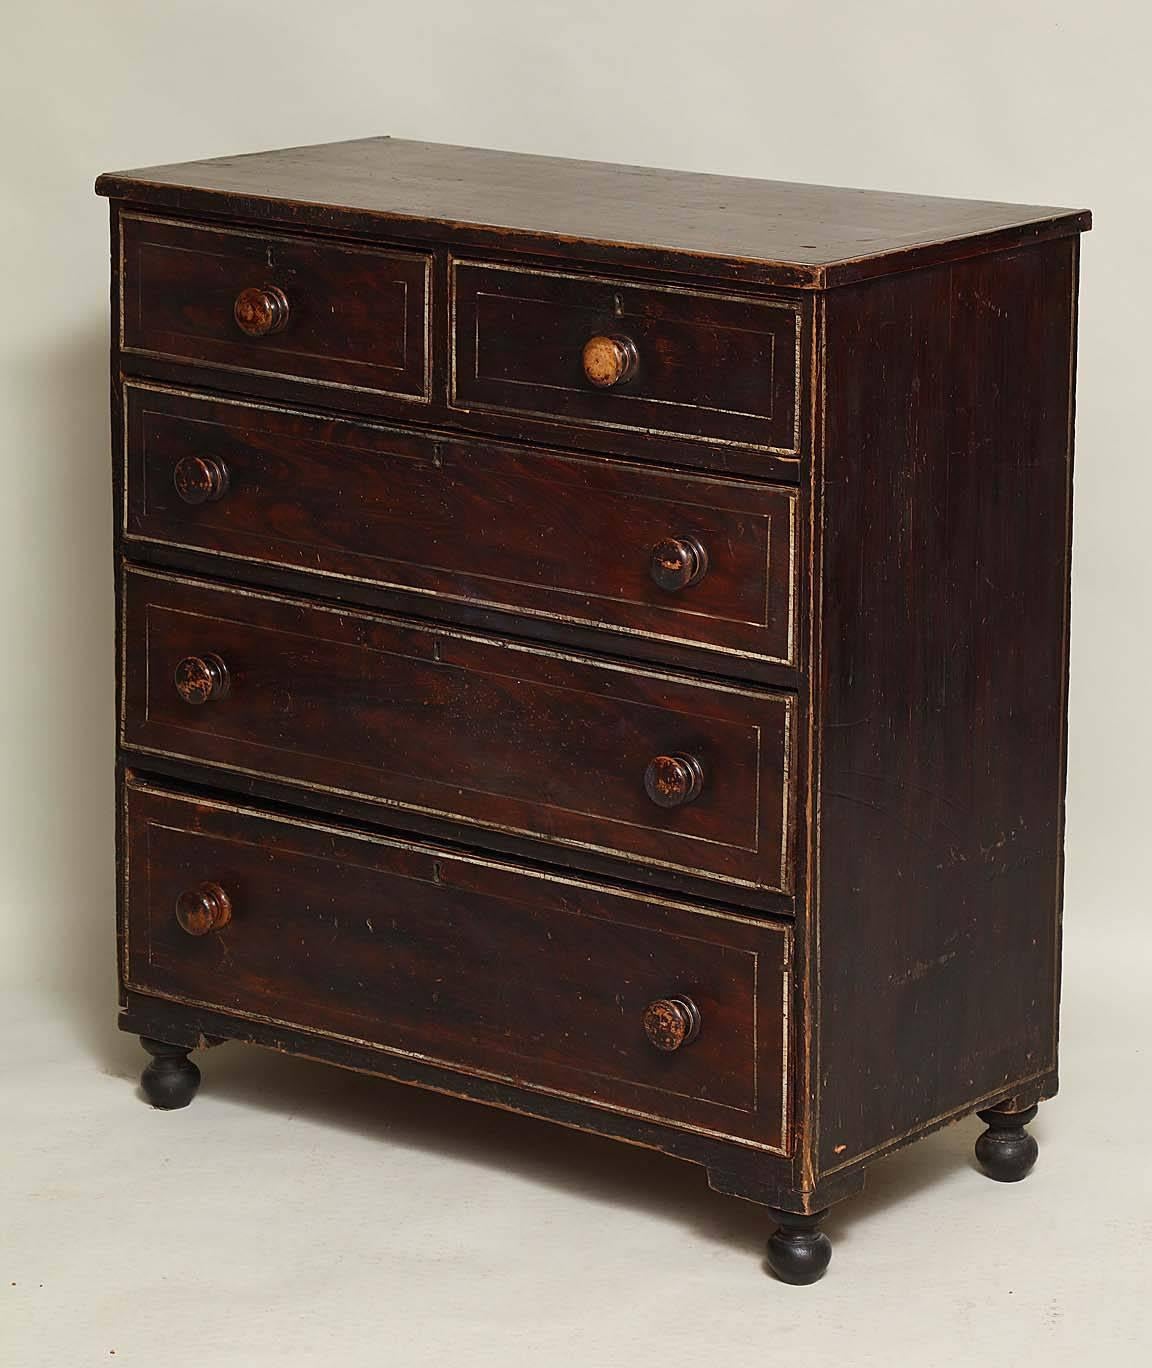 Good English country faux rosewood grained chest of two over three drawers, the top, sides and fronts with simulated rosewood and string inlay, with original turned wooden knobs and feet, the whole with pleasing worn and patinated painted surface.